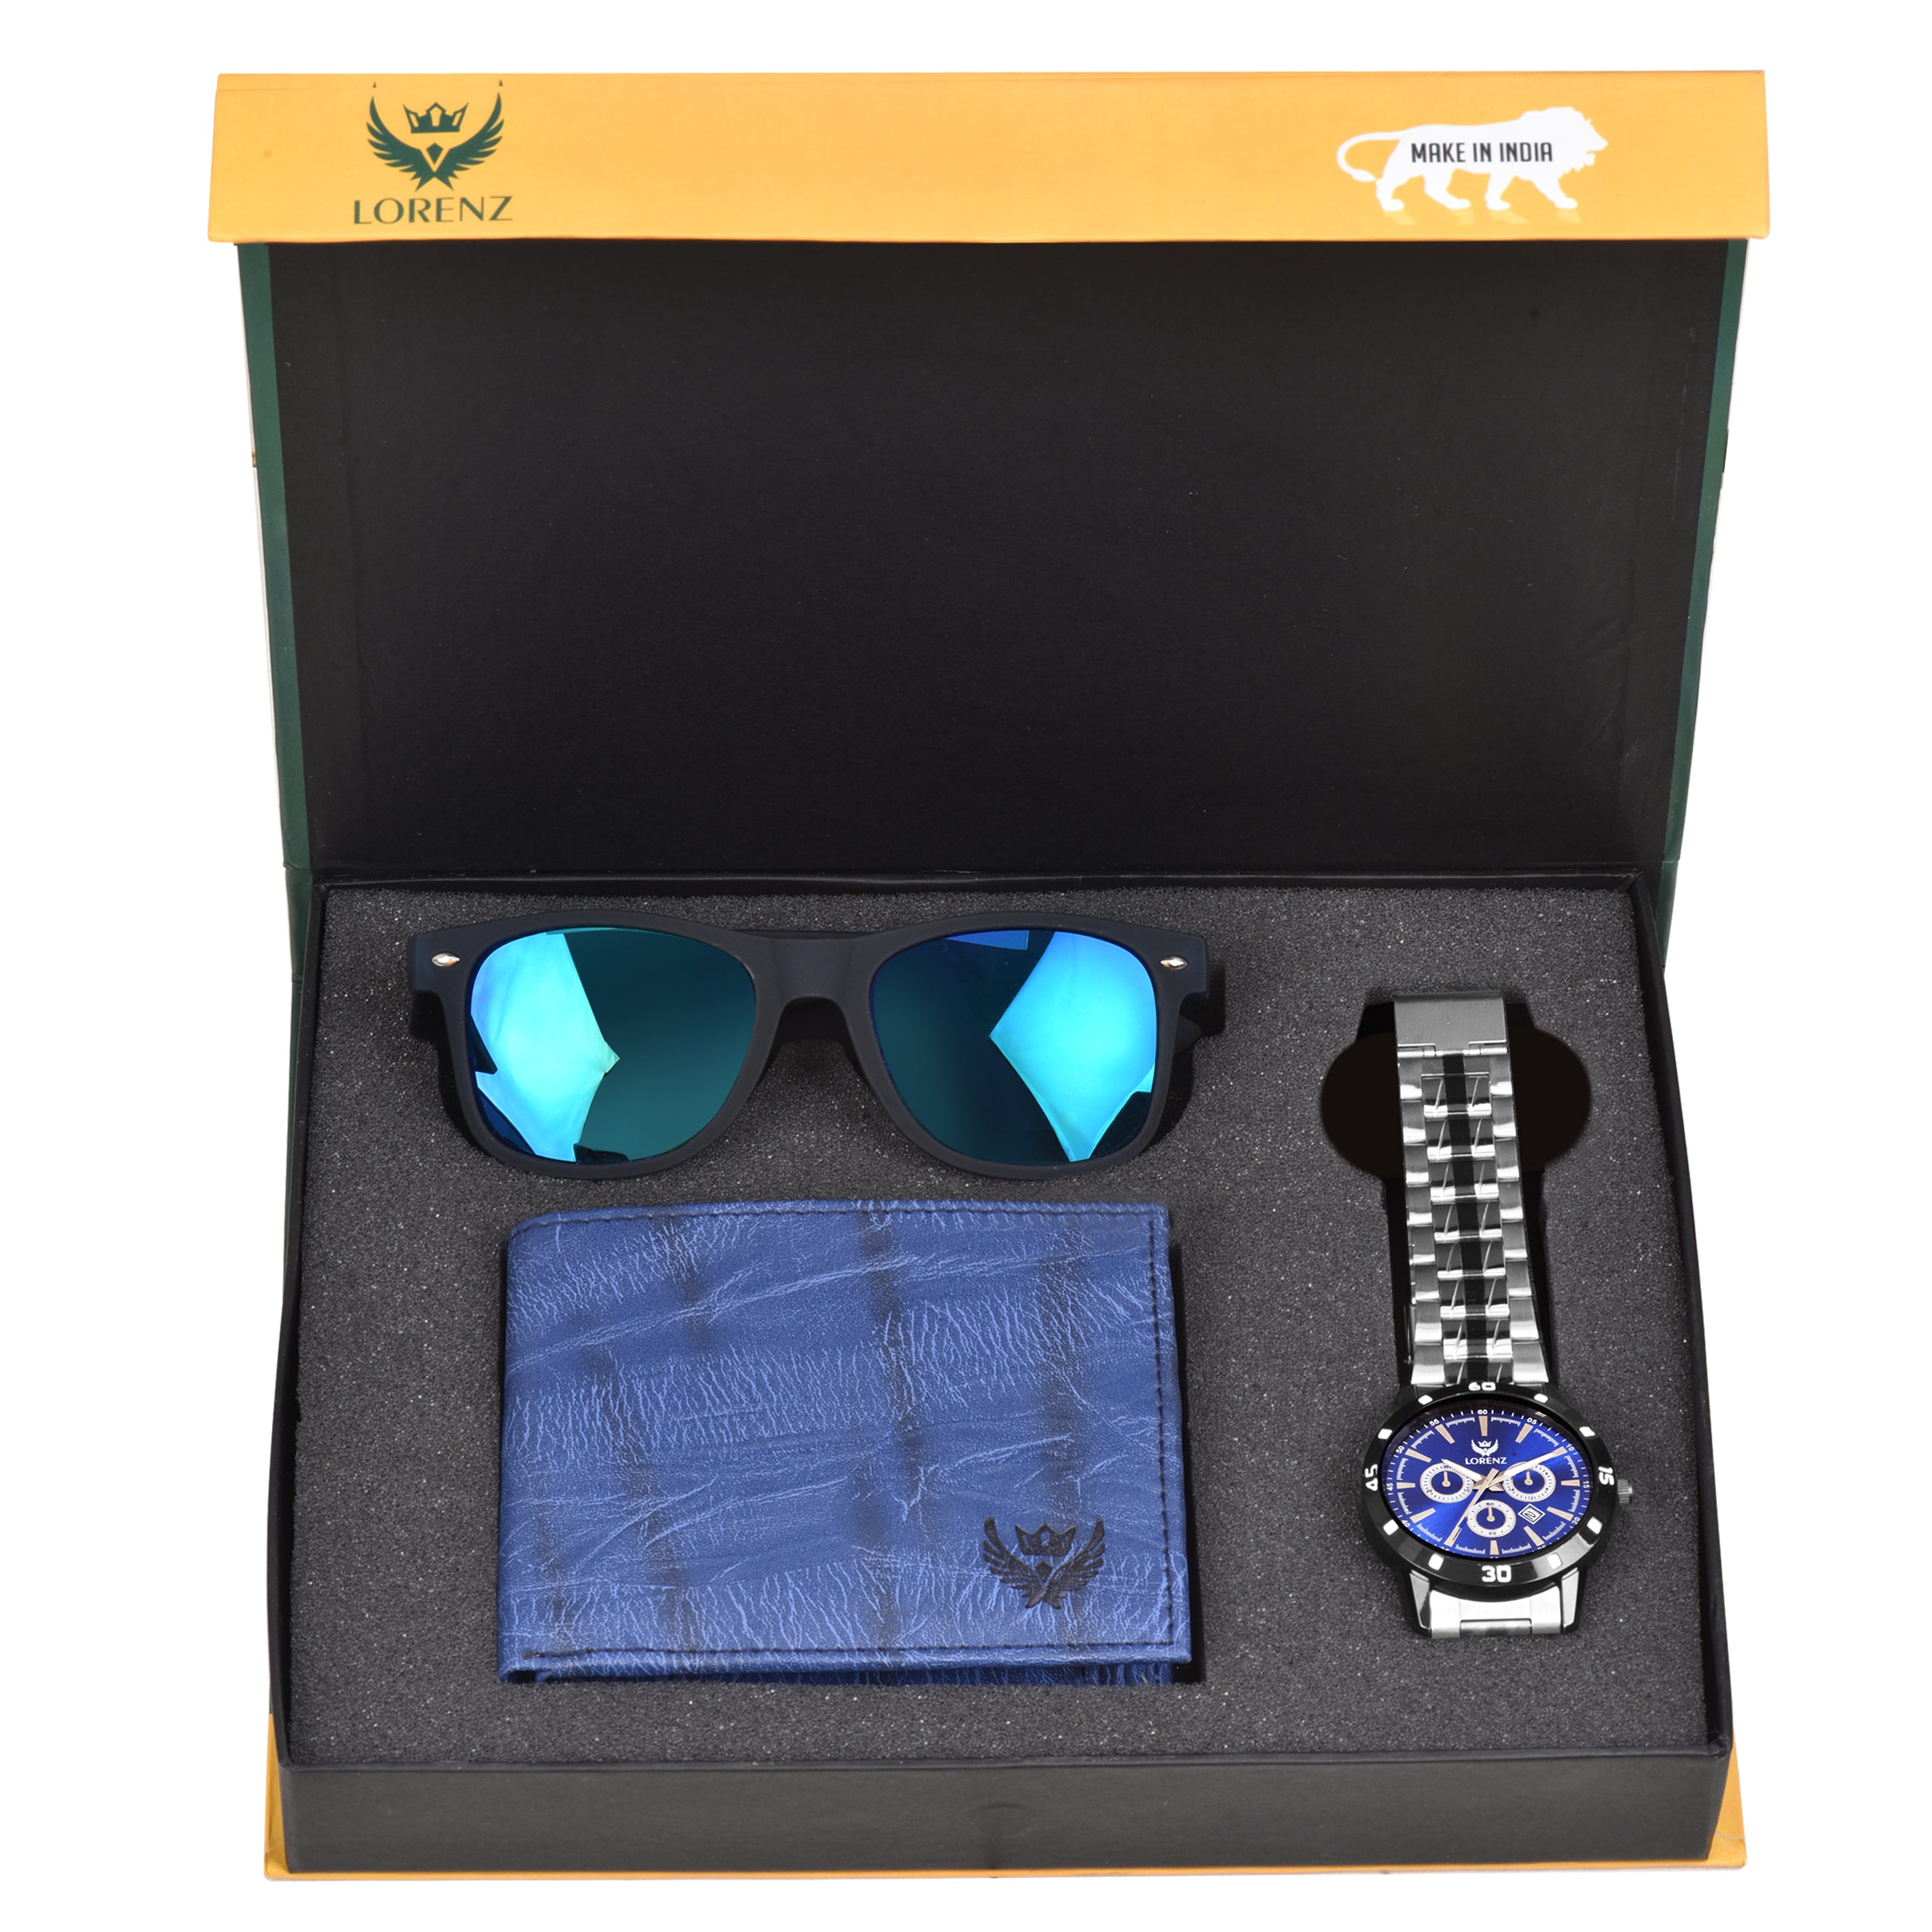 Lorenz 3-Piece Blue Gift Set: Watch with blue dial and blue leather strap, blue bi-fold wallet, and black sunglasses.